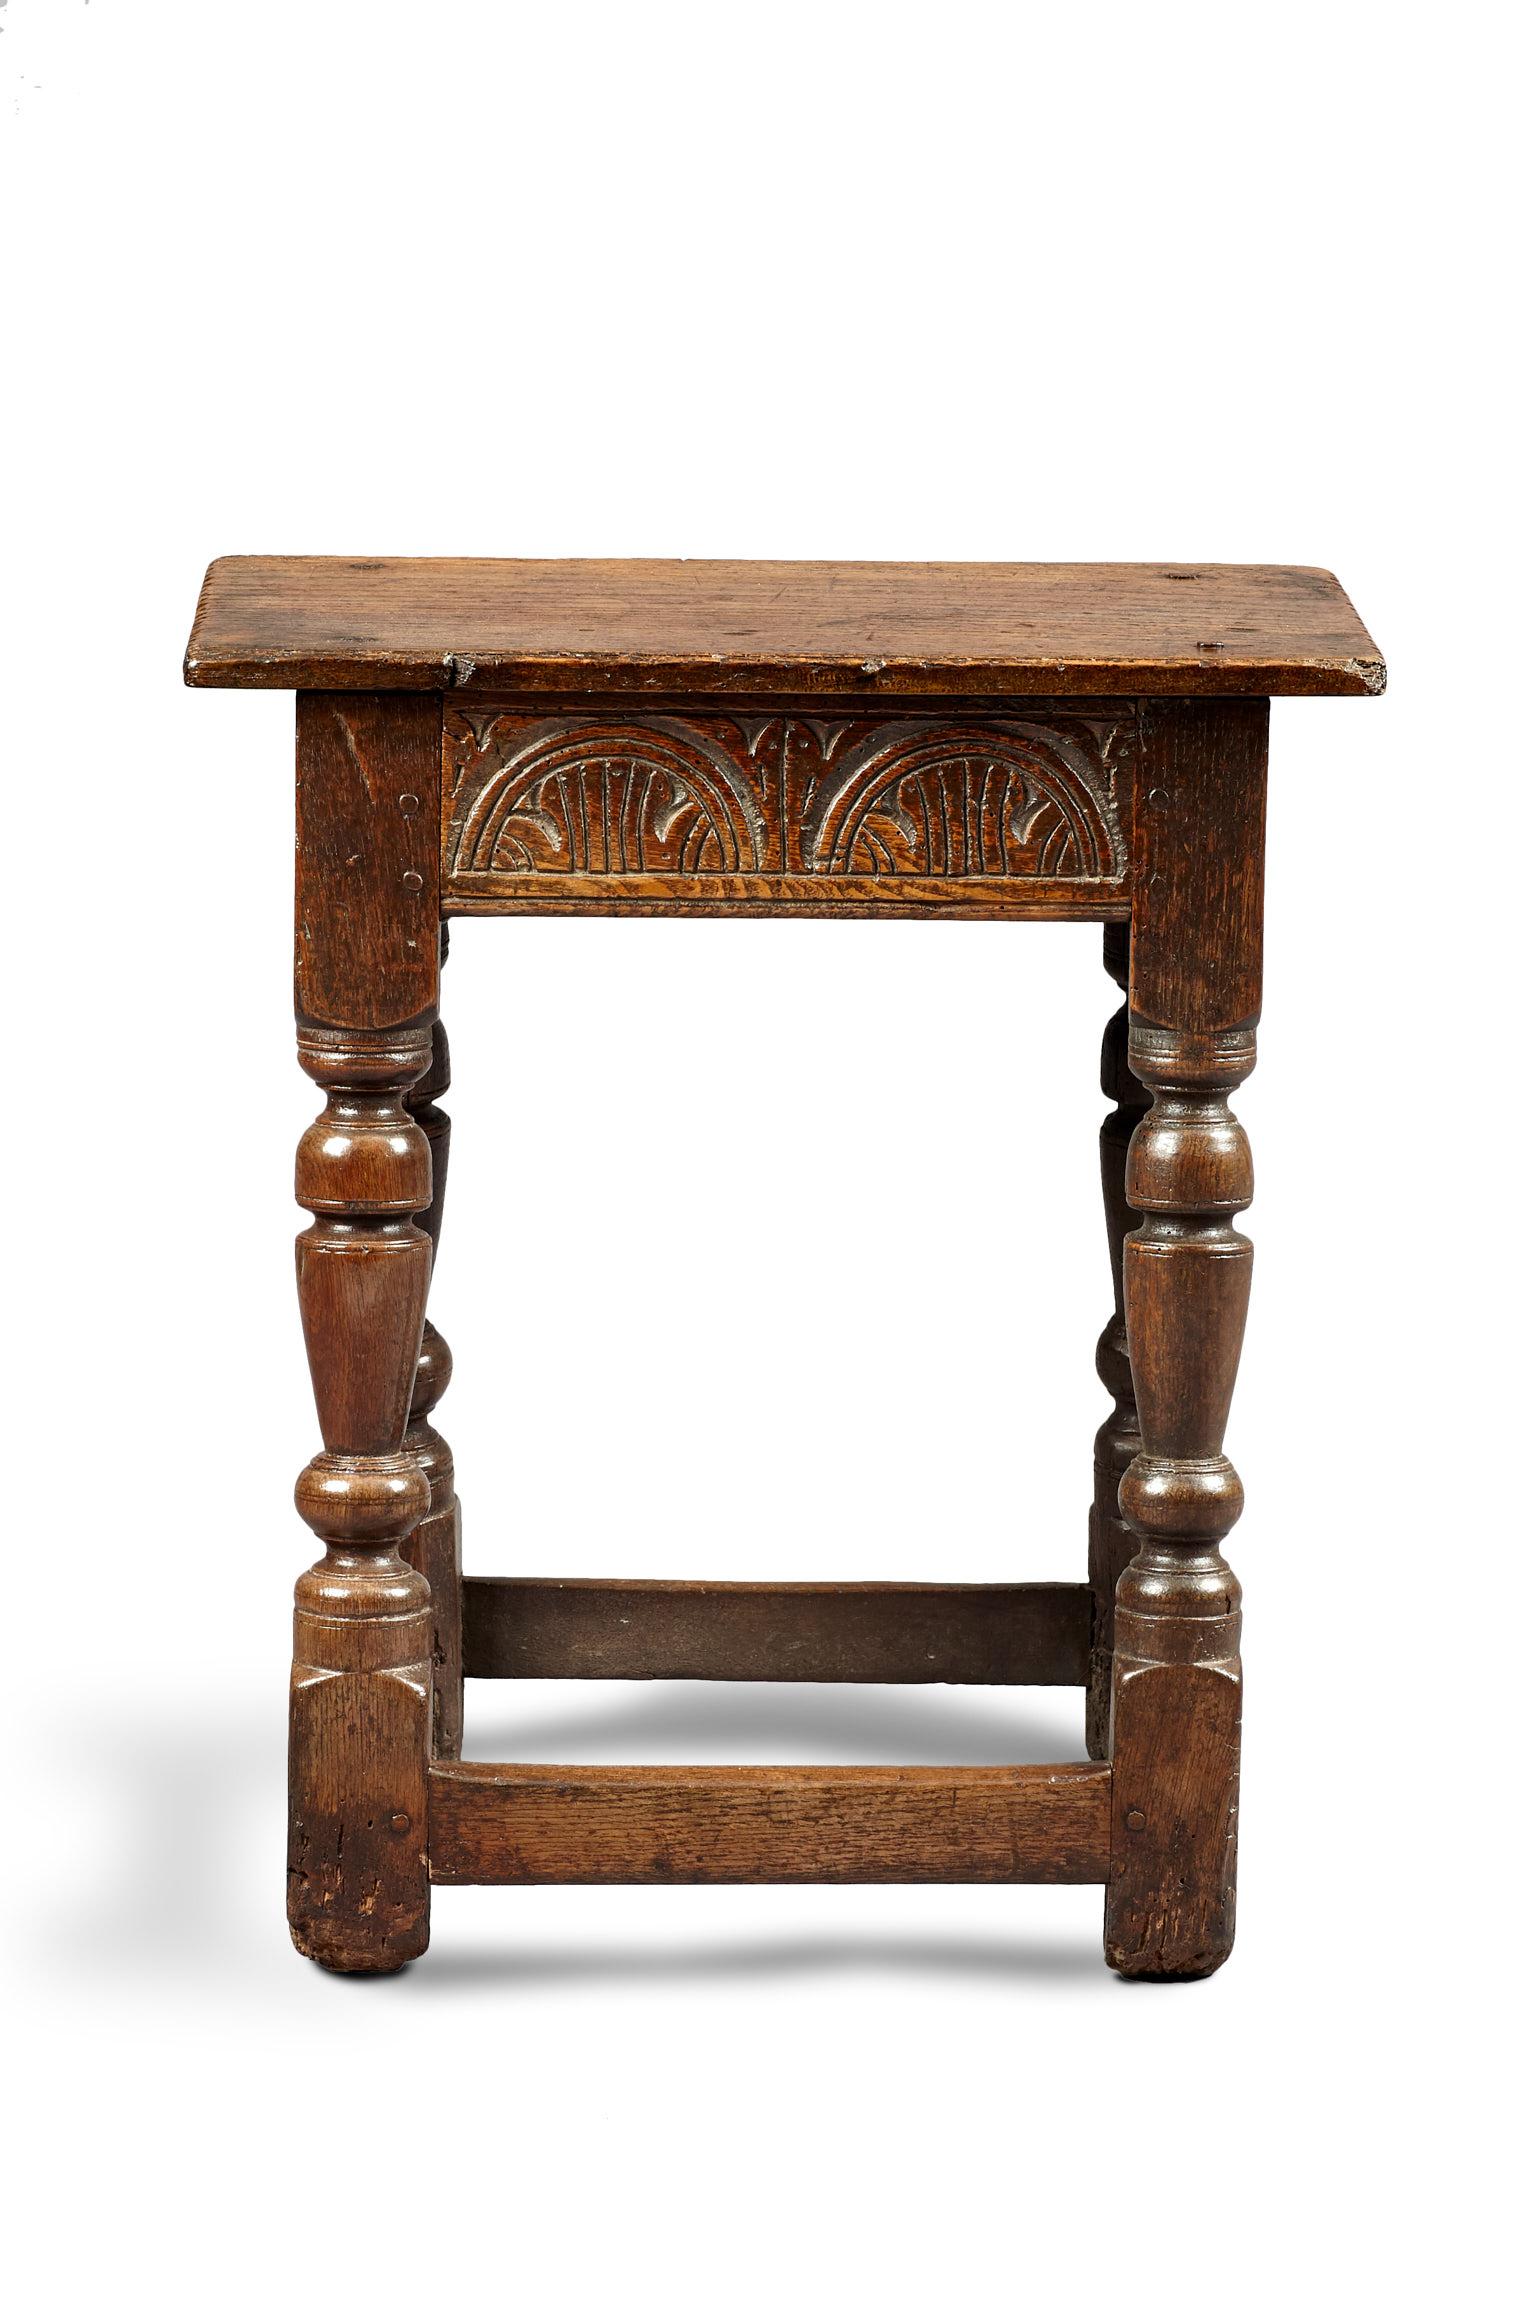 Two Charles I Oak Joined Stools, English, Gloucestershire, circa 1630-1640 For Sale 2